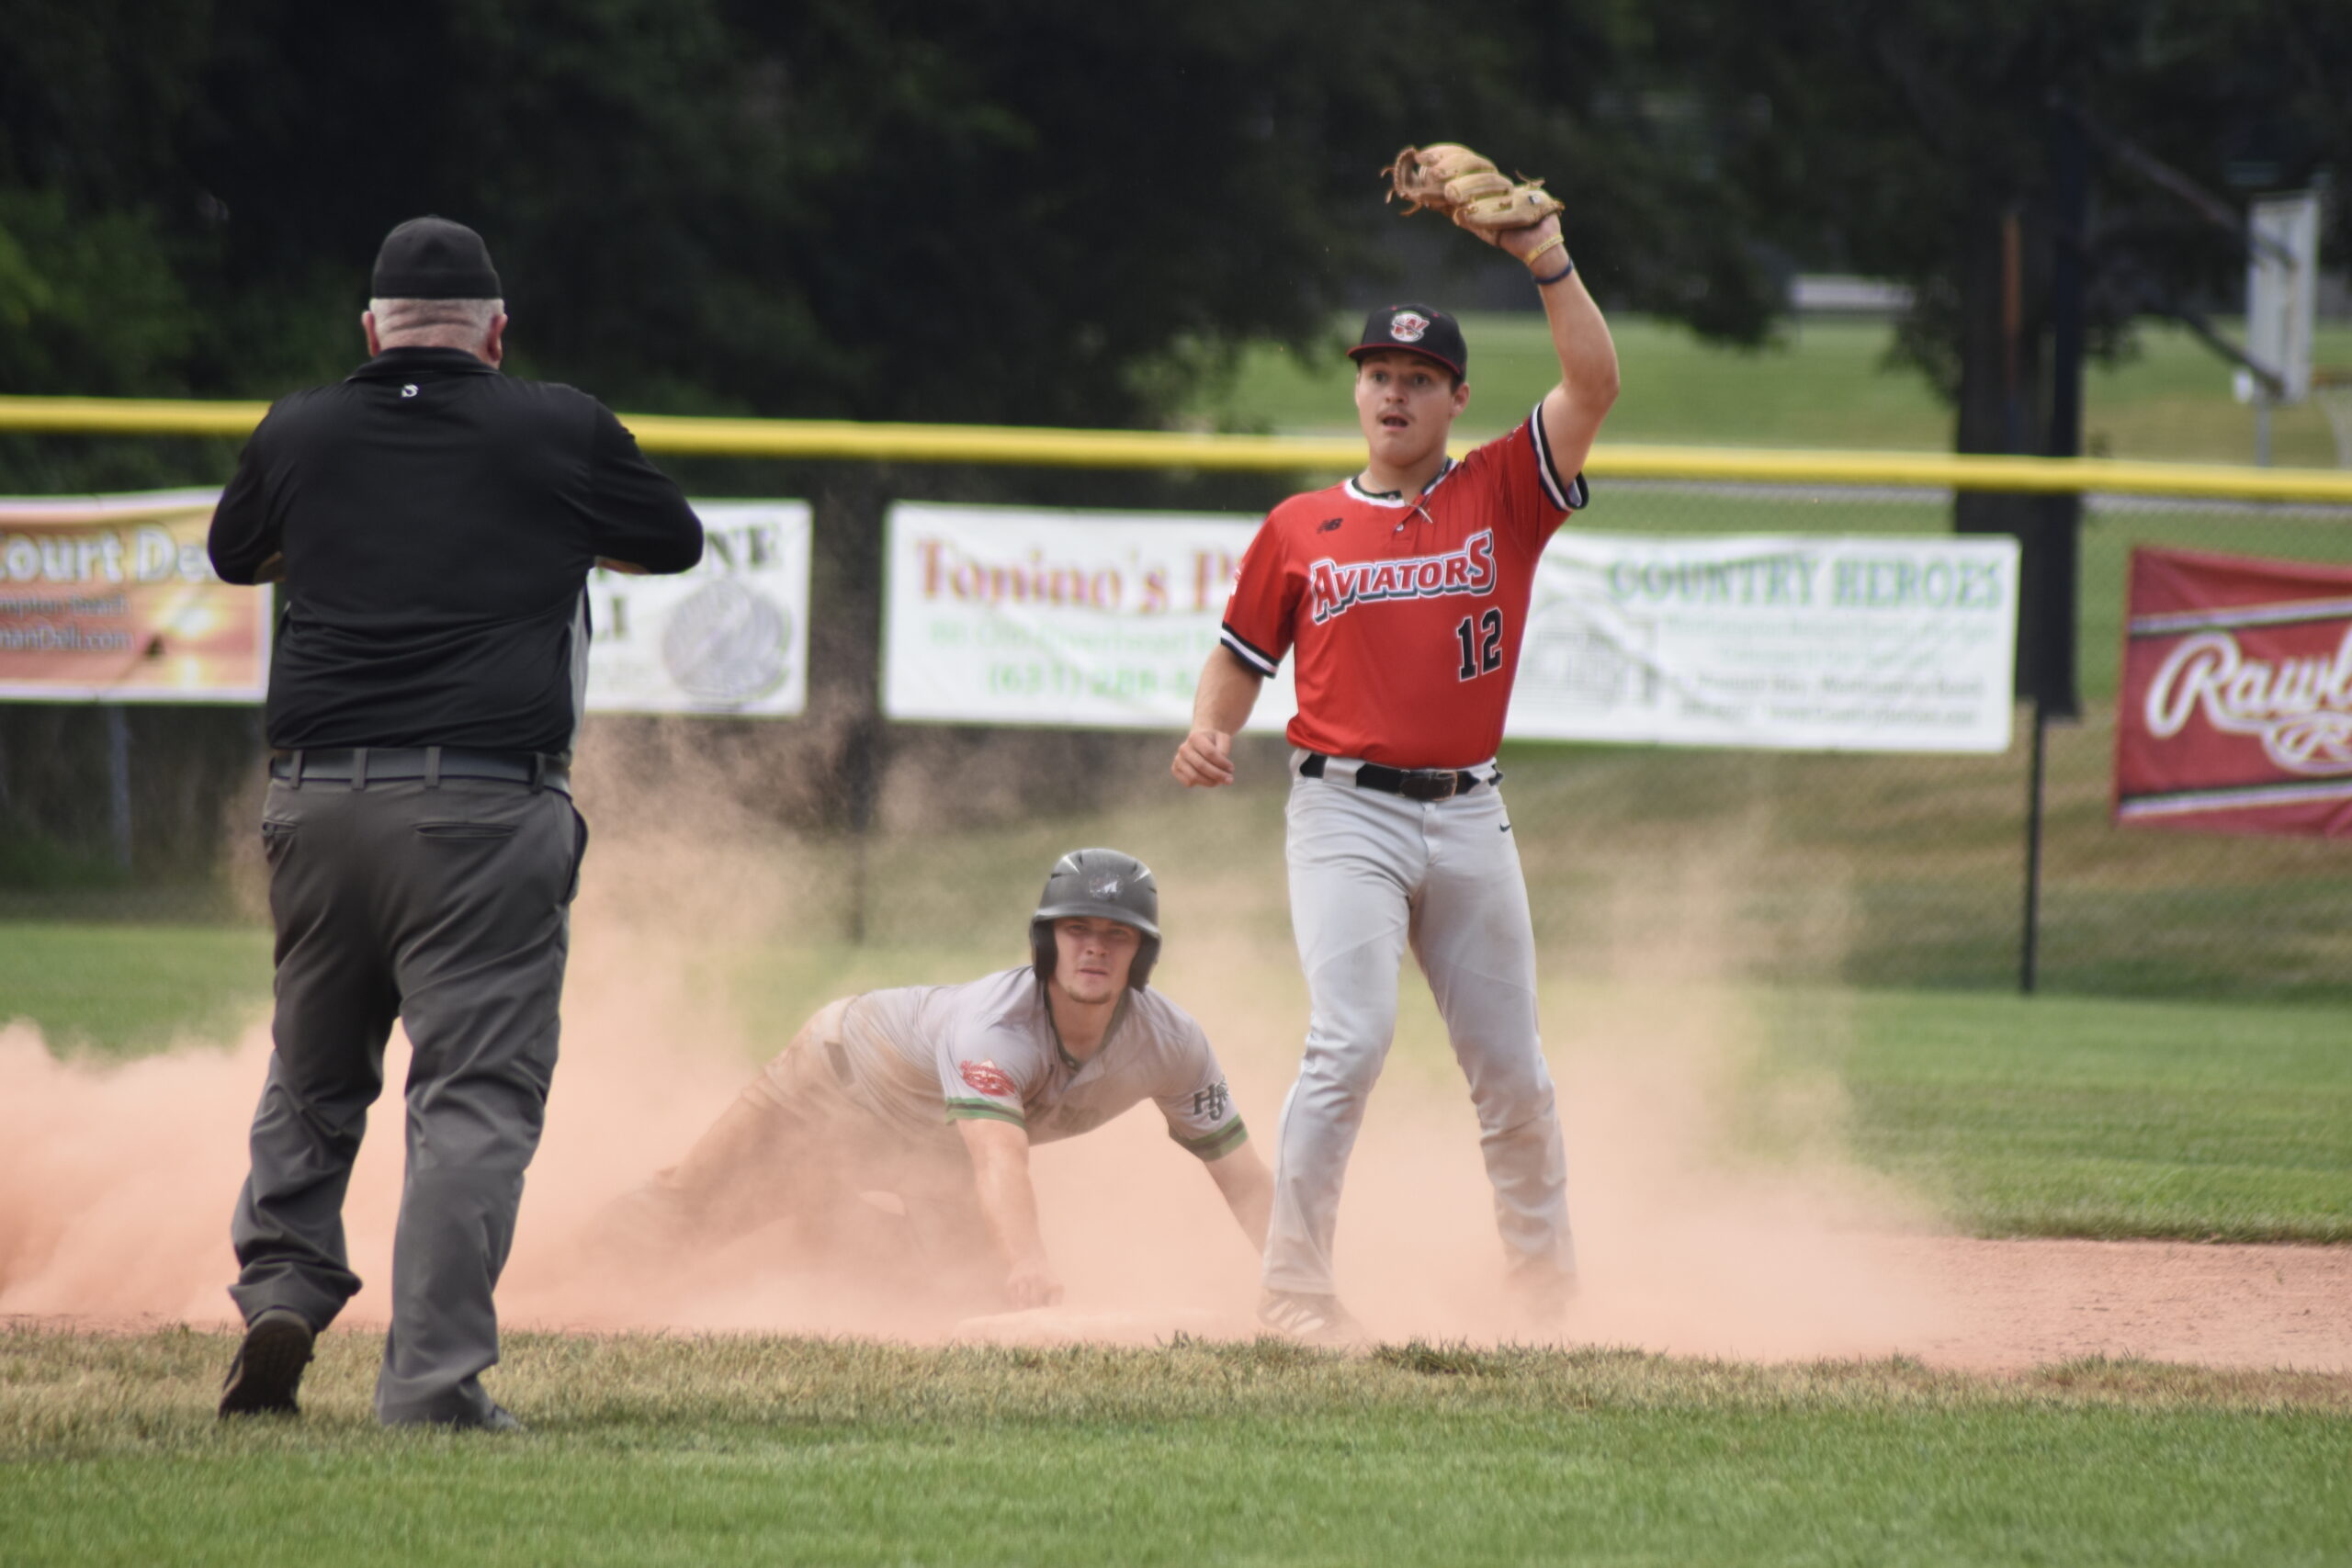 Westhampton shortstop Sam Hill (UMass-Amherst) can't believe the safe call from the umpire on a close play at second base.   DREW BUDD